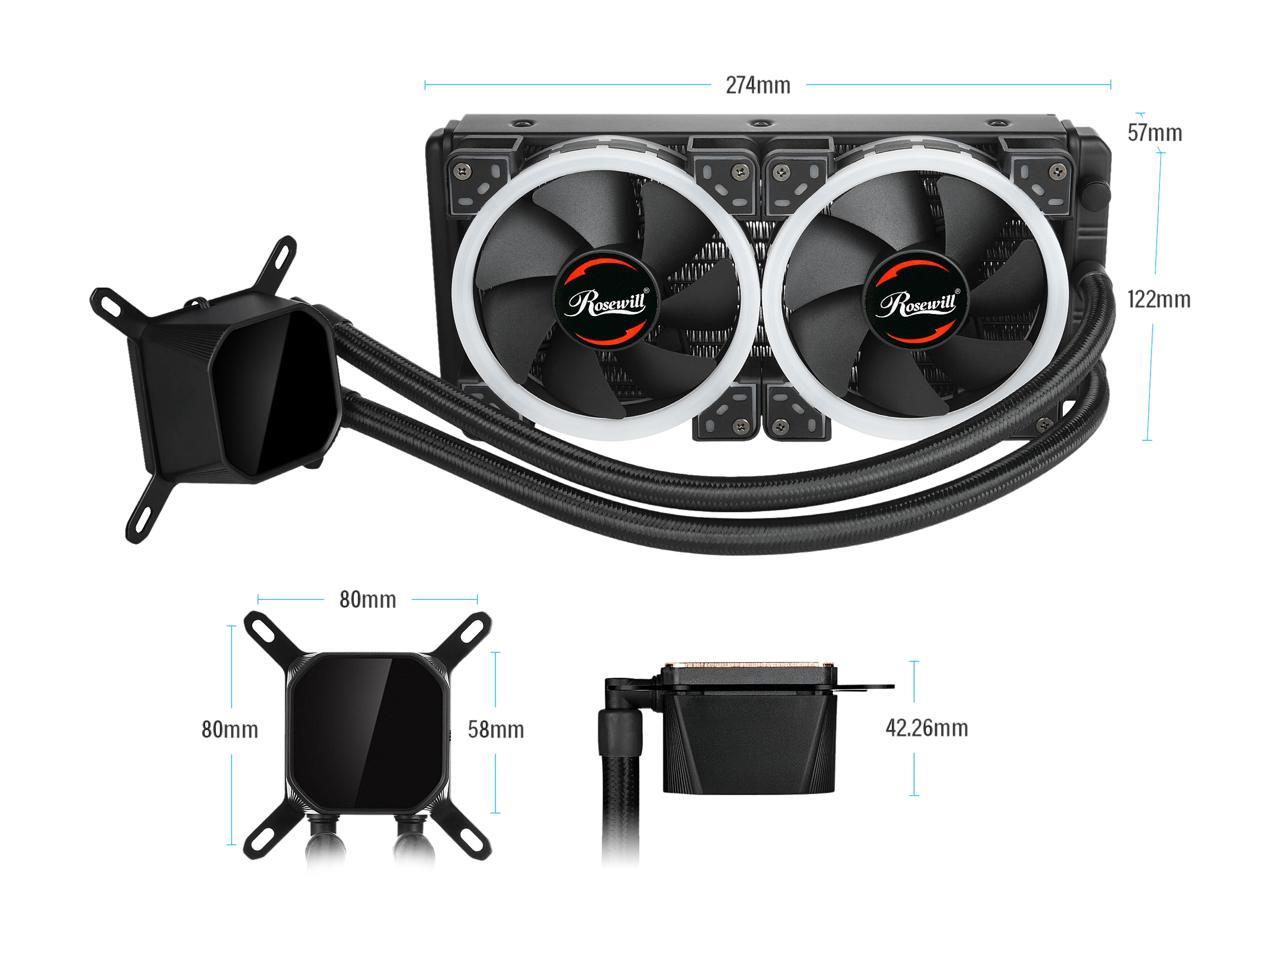 Rosewill RGB AIO 240mm CPU Liquid Cooler, Closed Loop PC Water Cooling, Quiet Addressable RGB Ring Fans, Intel/AMD Compatible, 400mm Sleeved Tubing - PB240-RGB